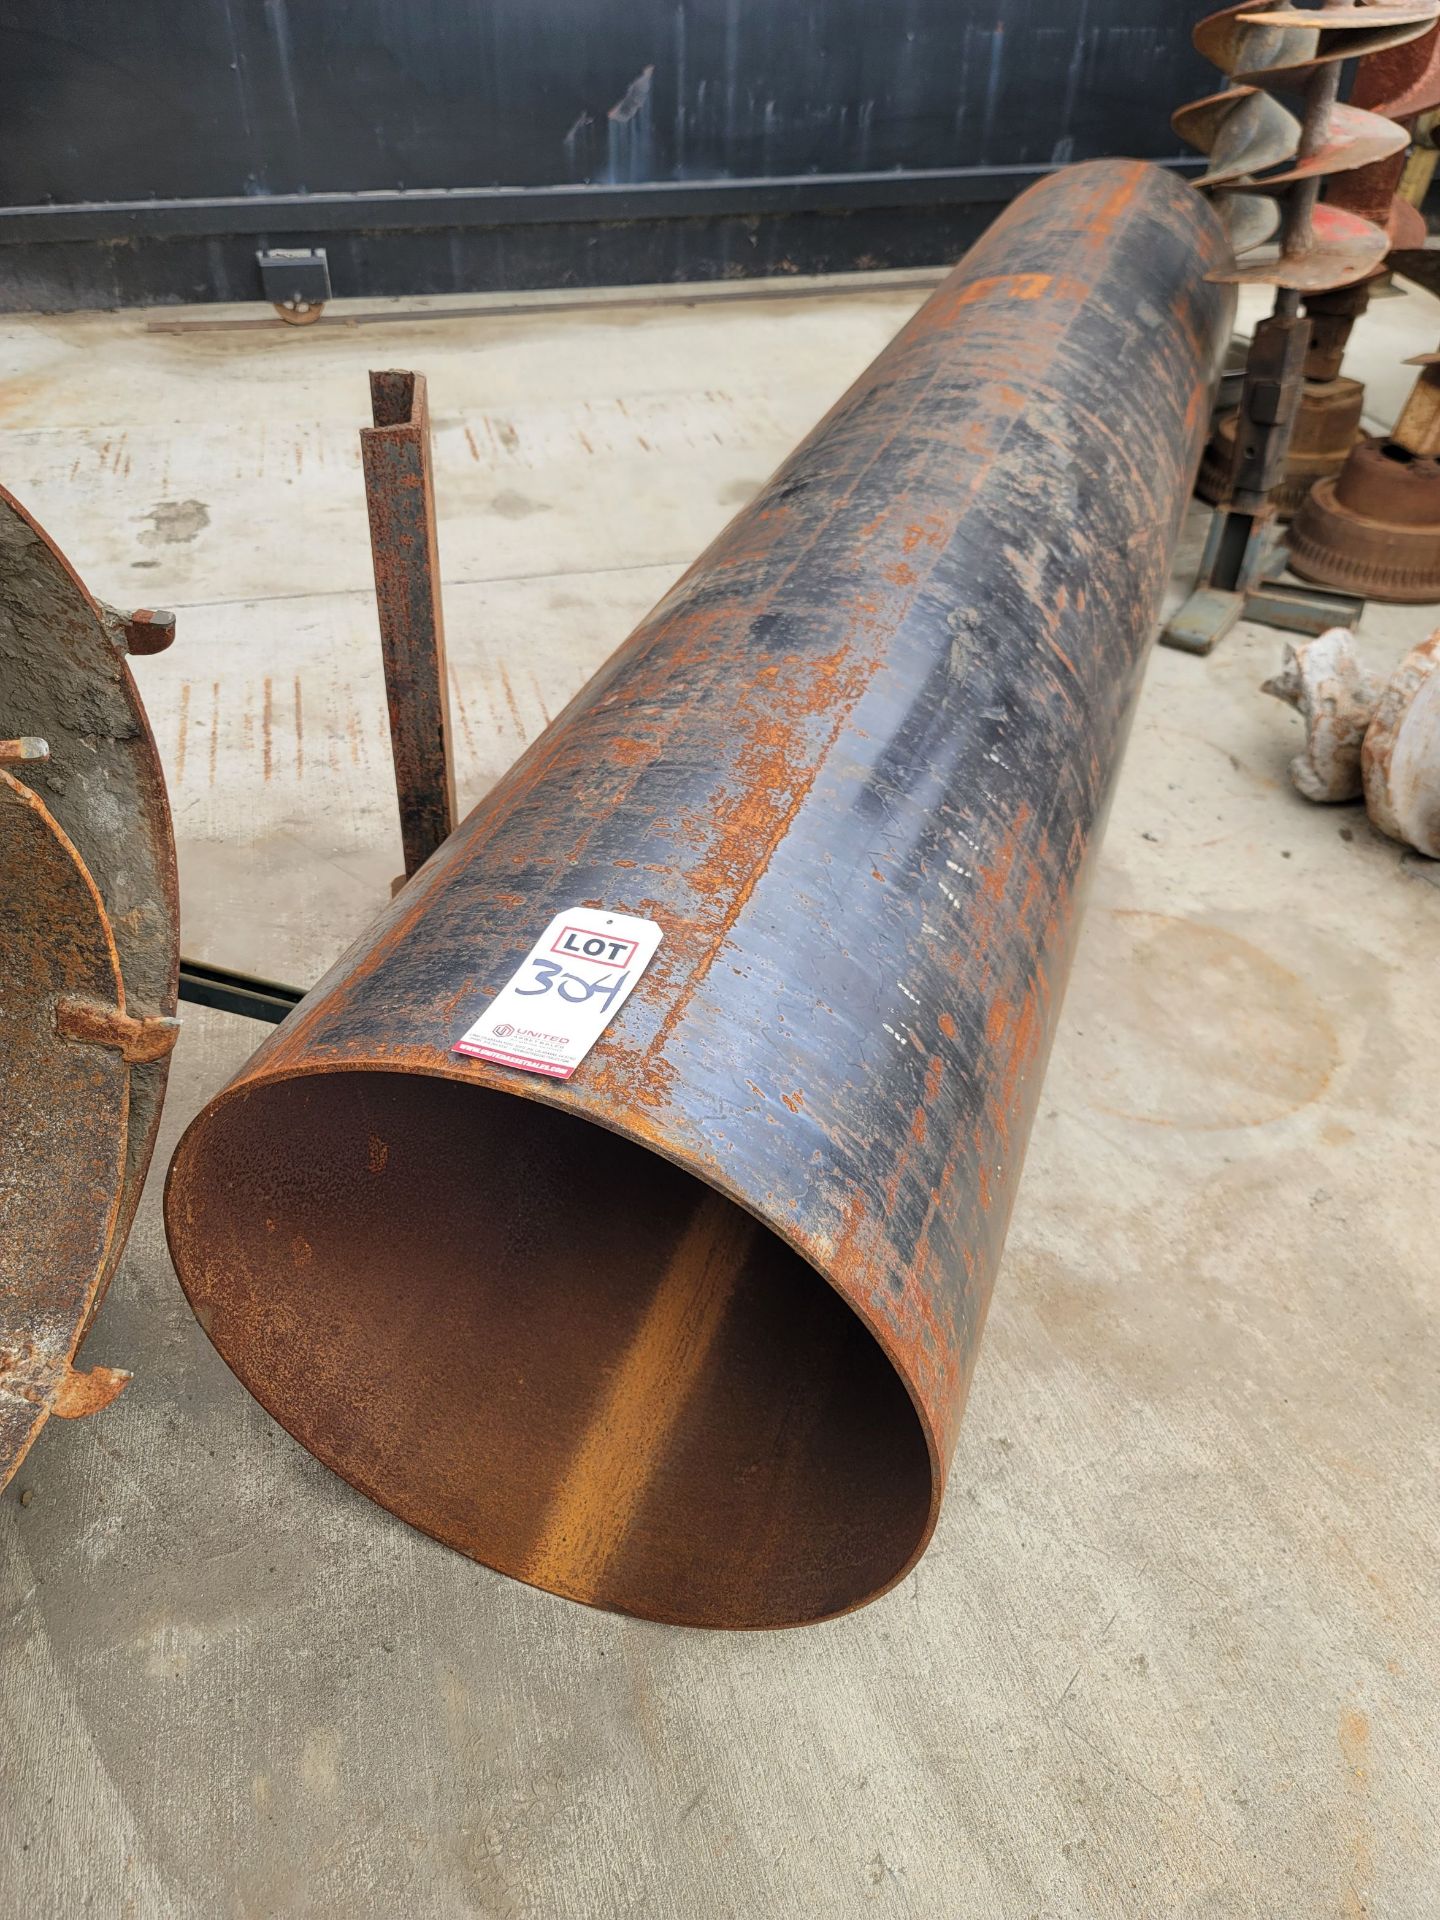 10' SECTION OF 24" DIA. STEEL PIPE, 1/4" WALL THICKNESS